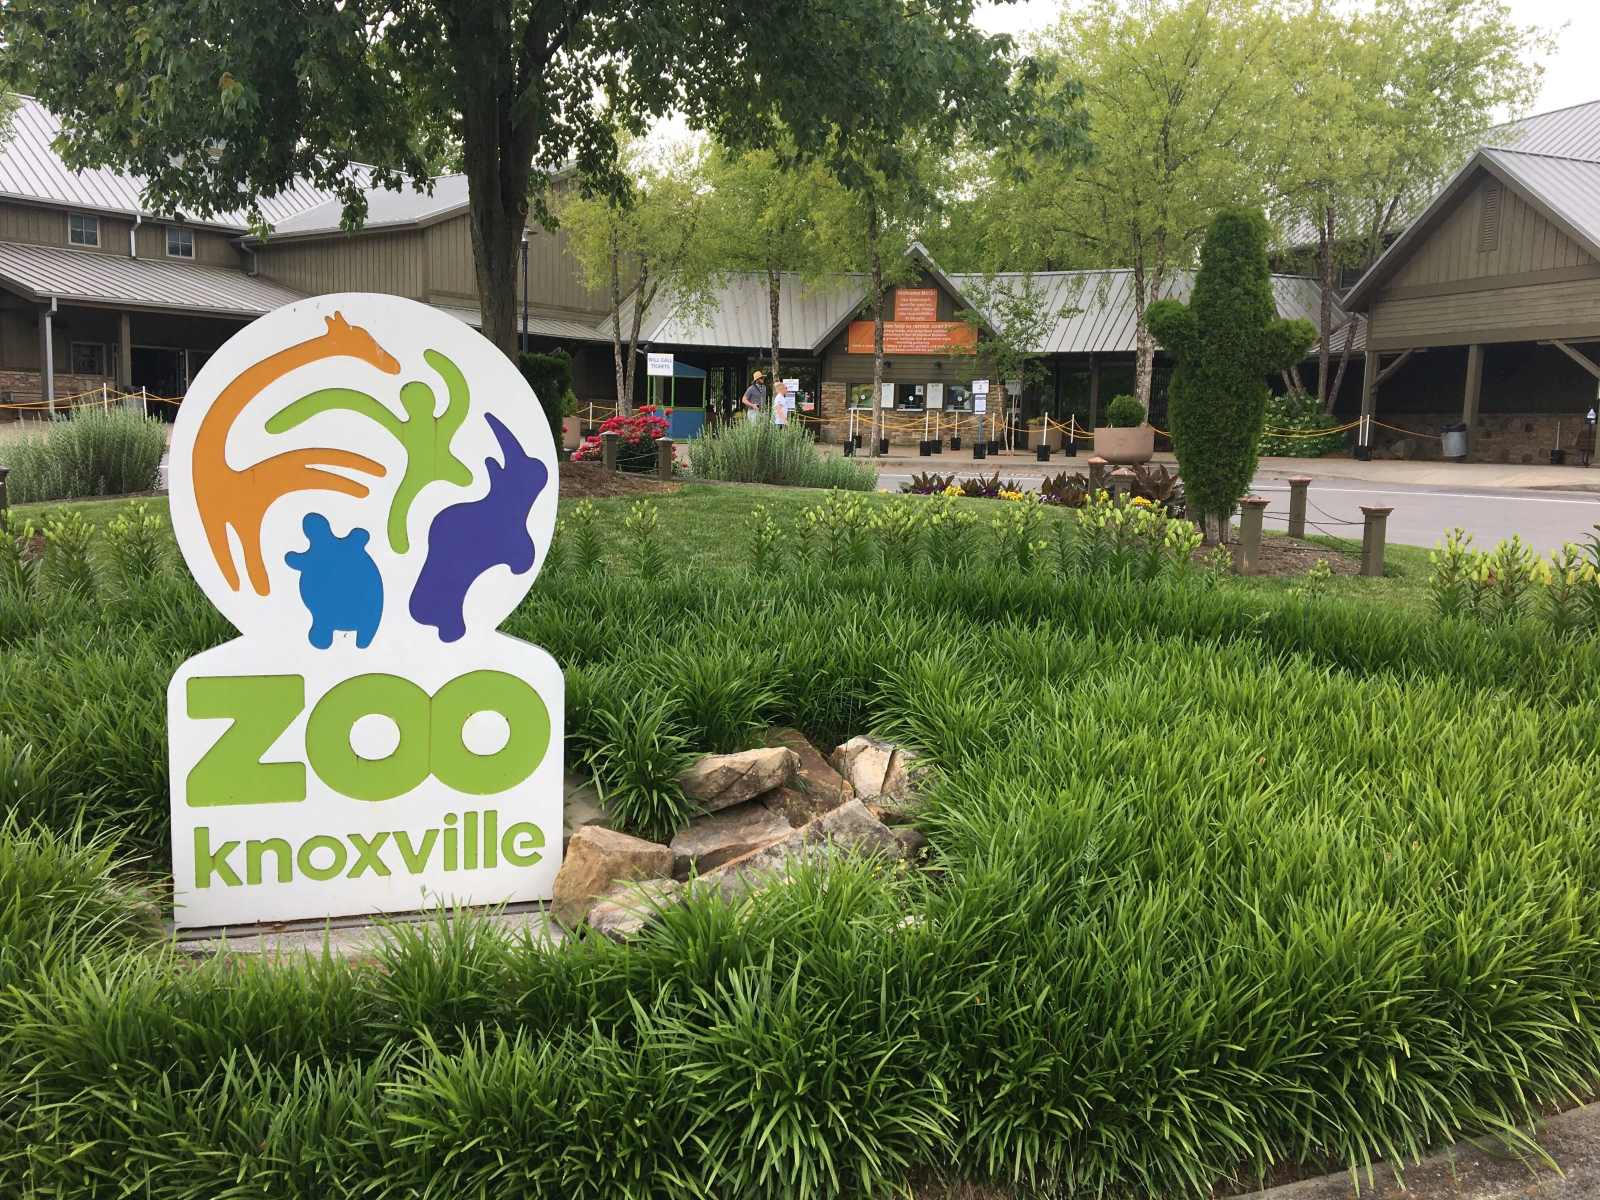 15 Fascinating Facts About Zoo Knoxville - Facts.net